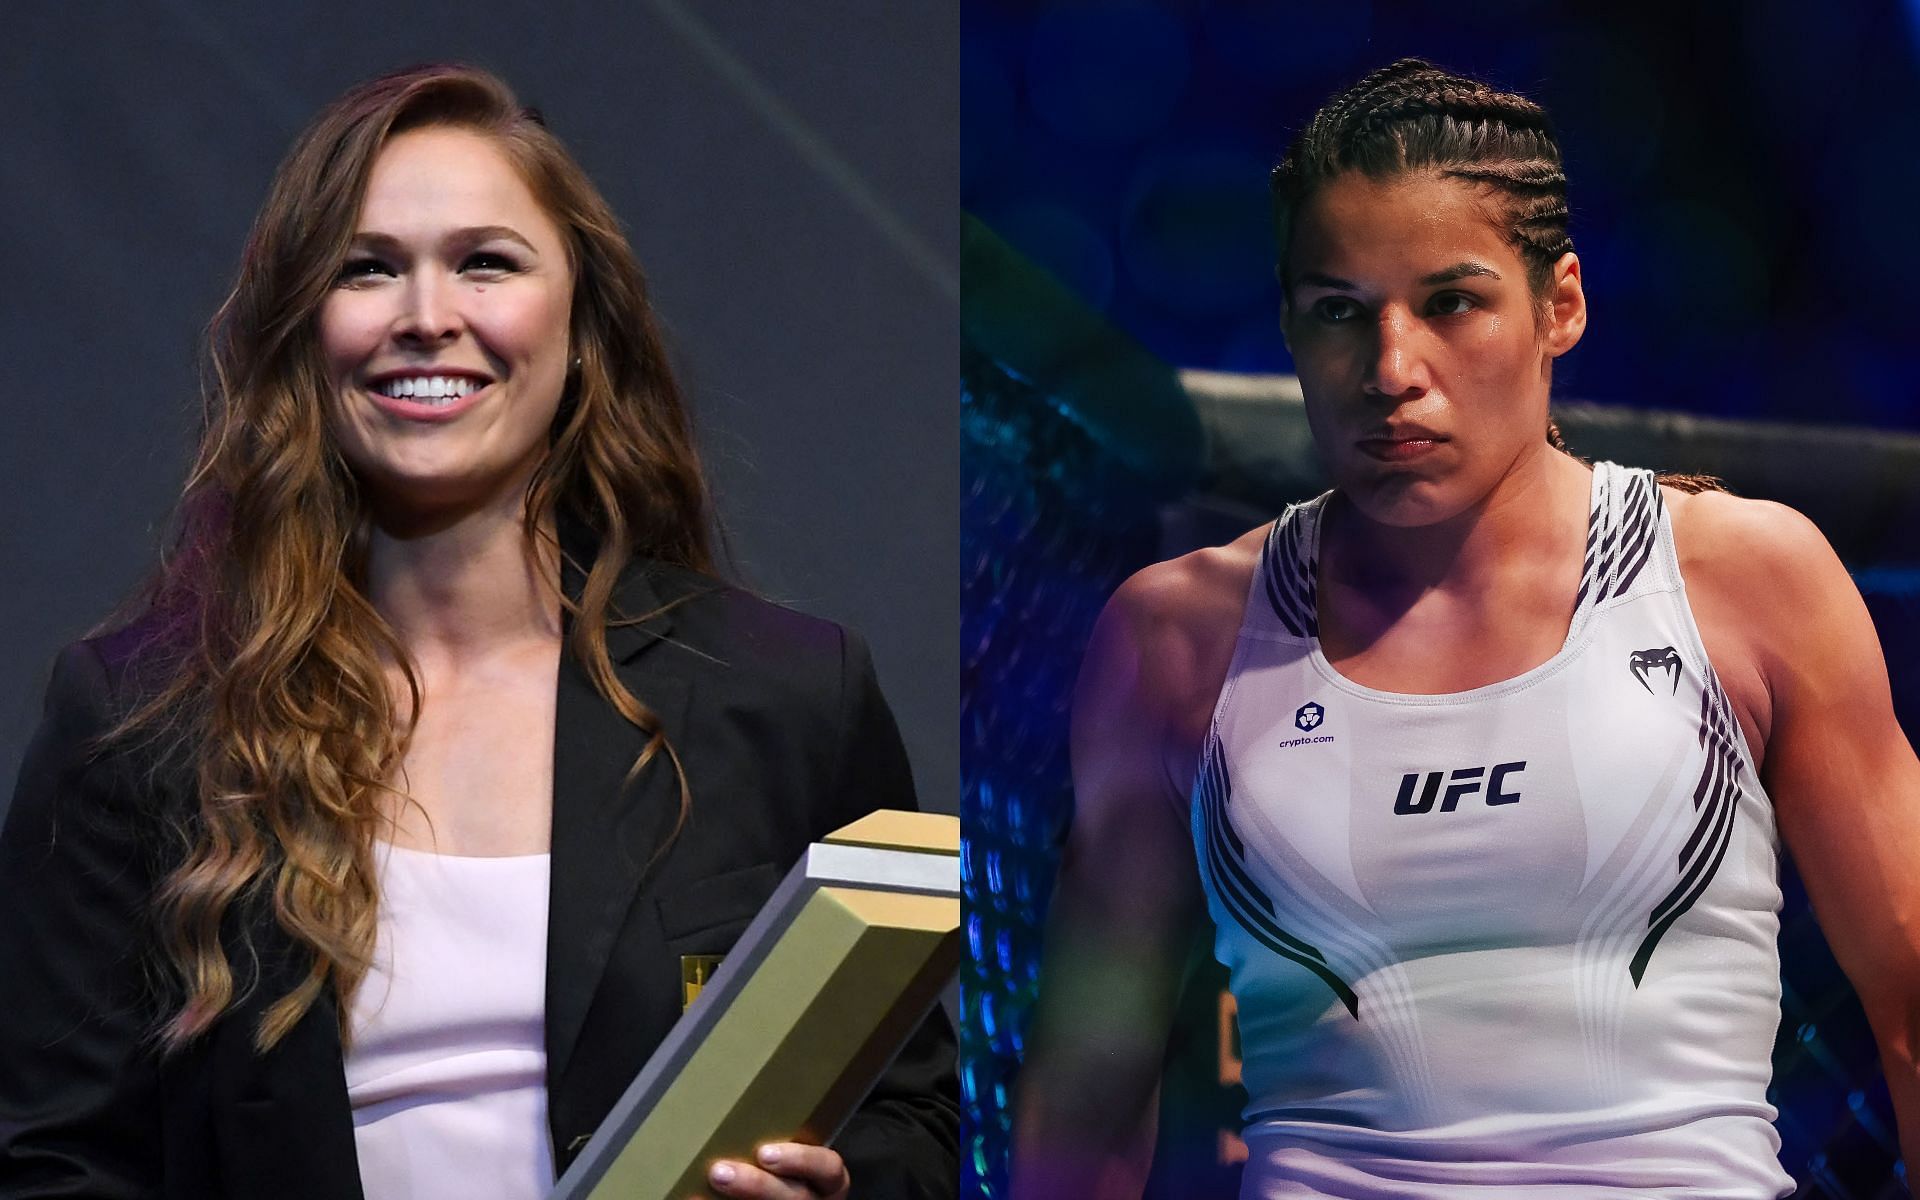 Ronda Rousey (left) and Julianna Pena (right) (Images via Getty)